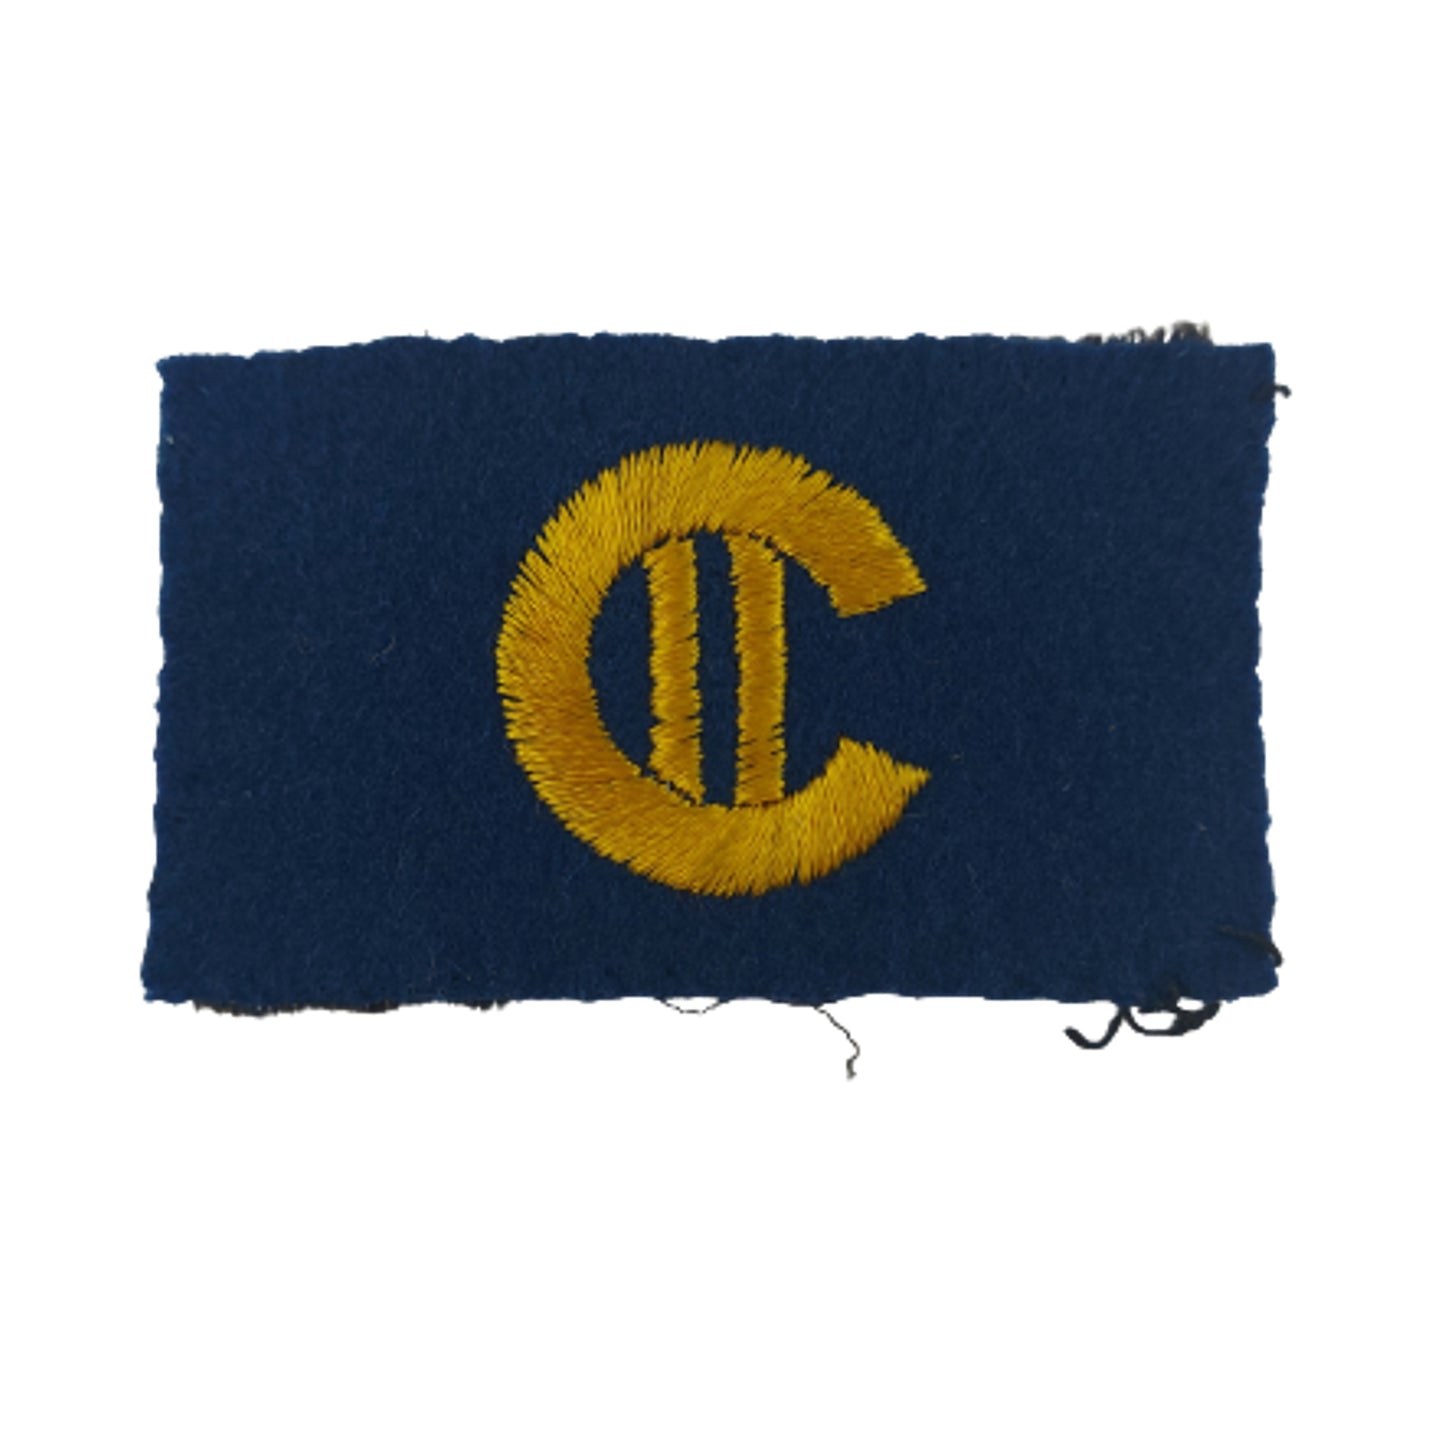 WW2 Canadian Army 2nd Division Officers Uniform Insignia